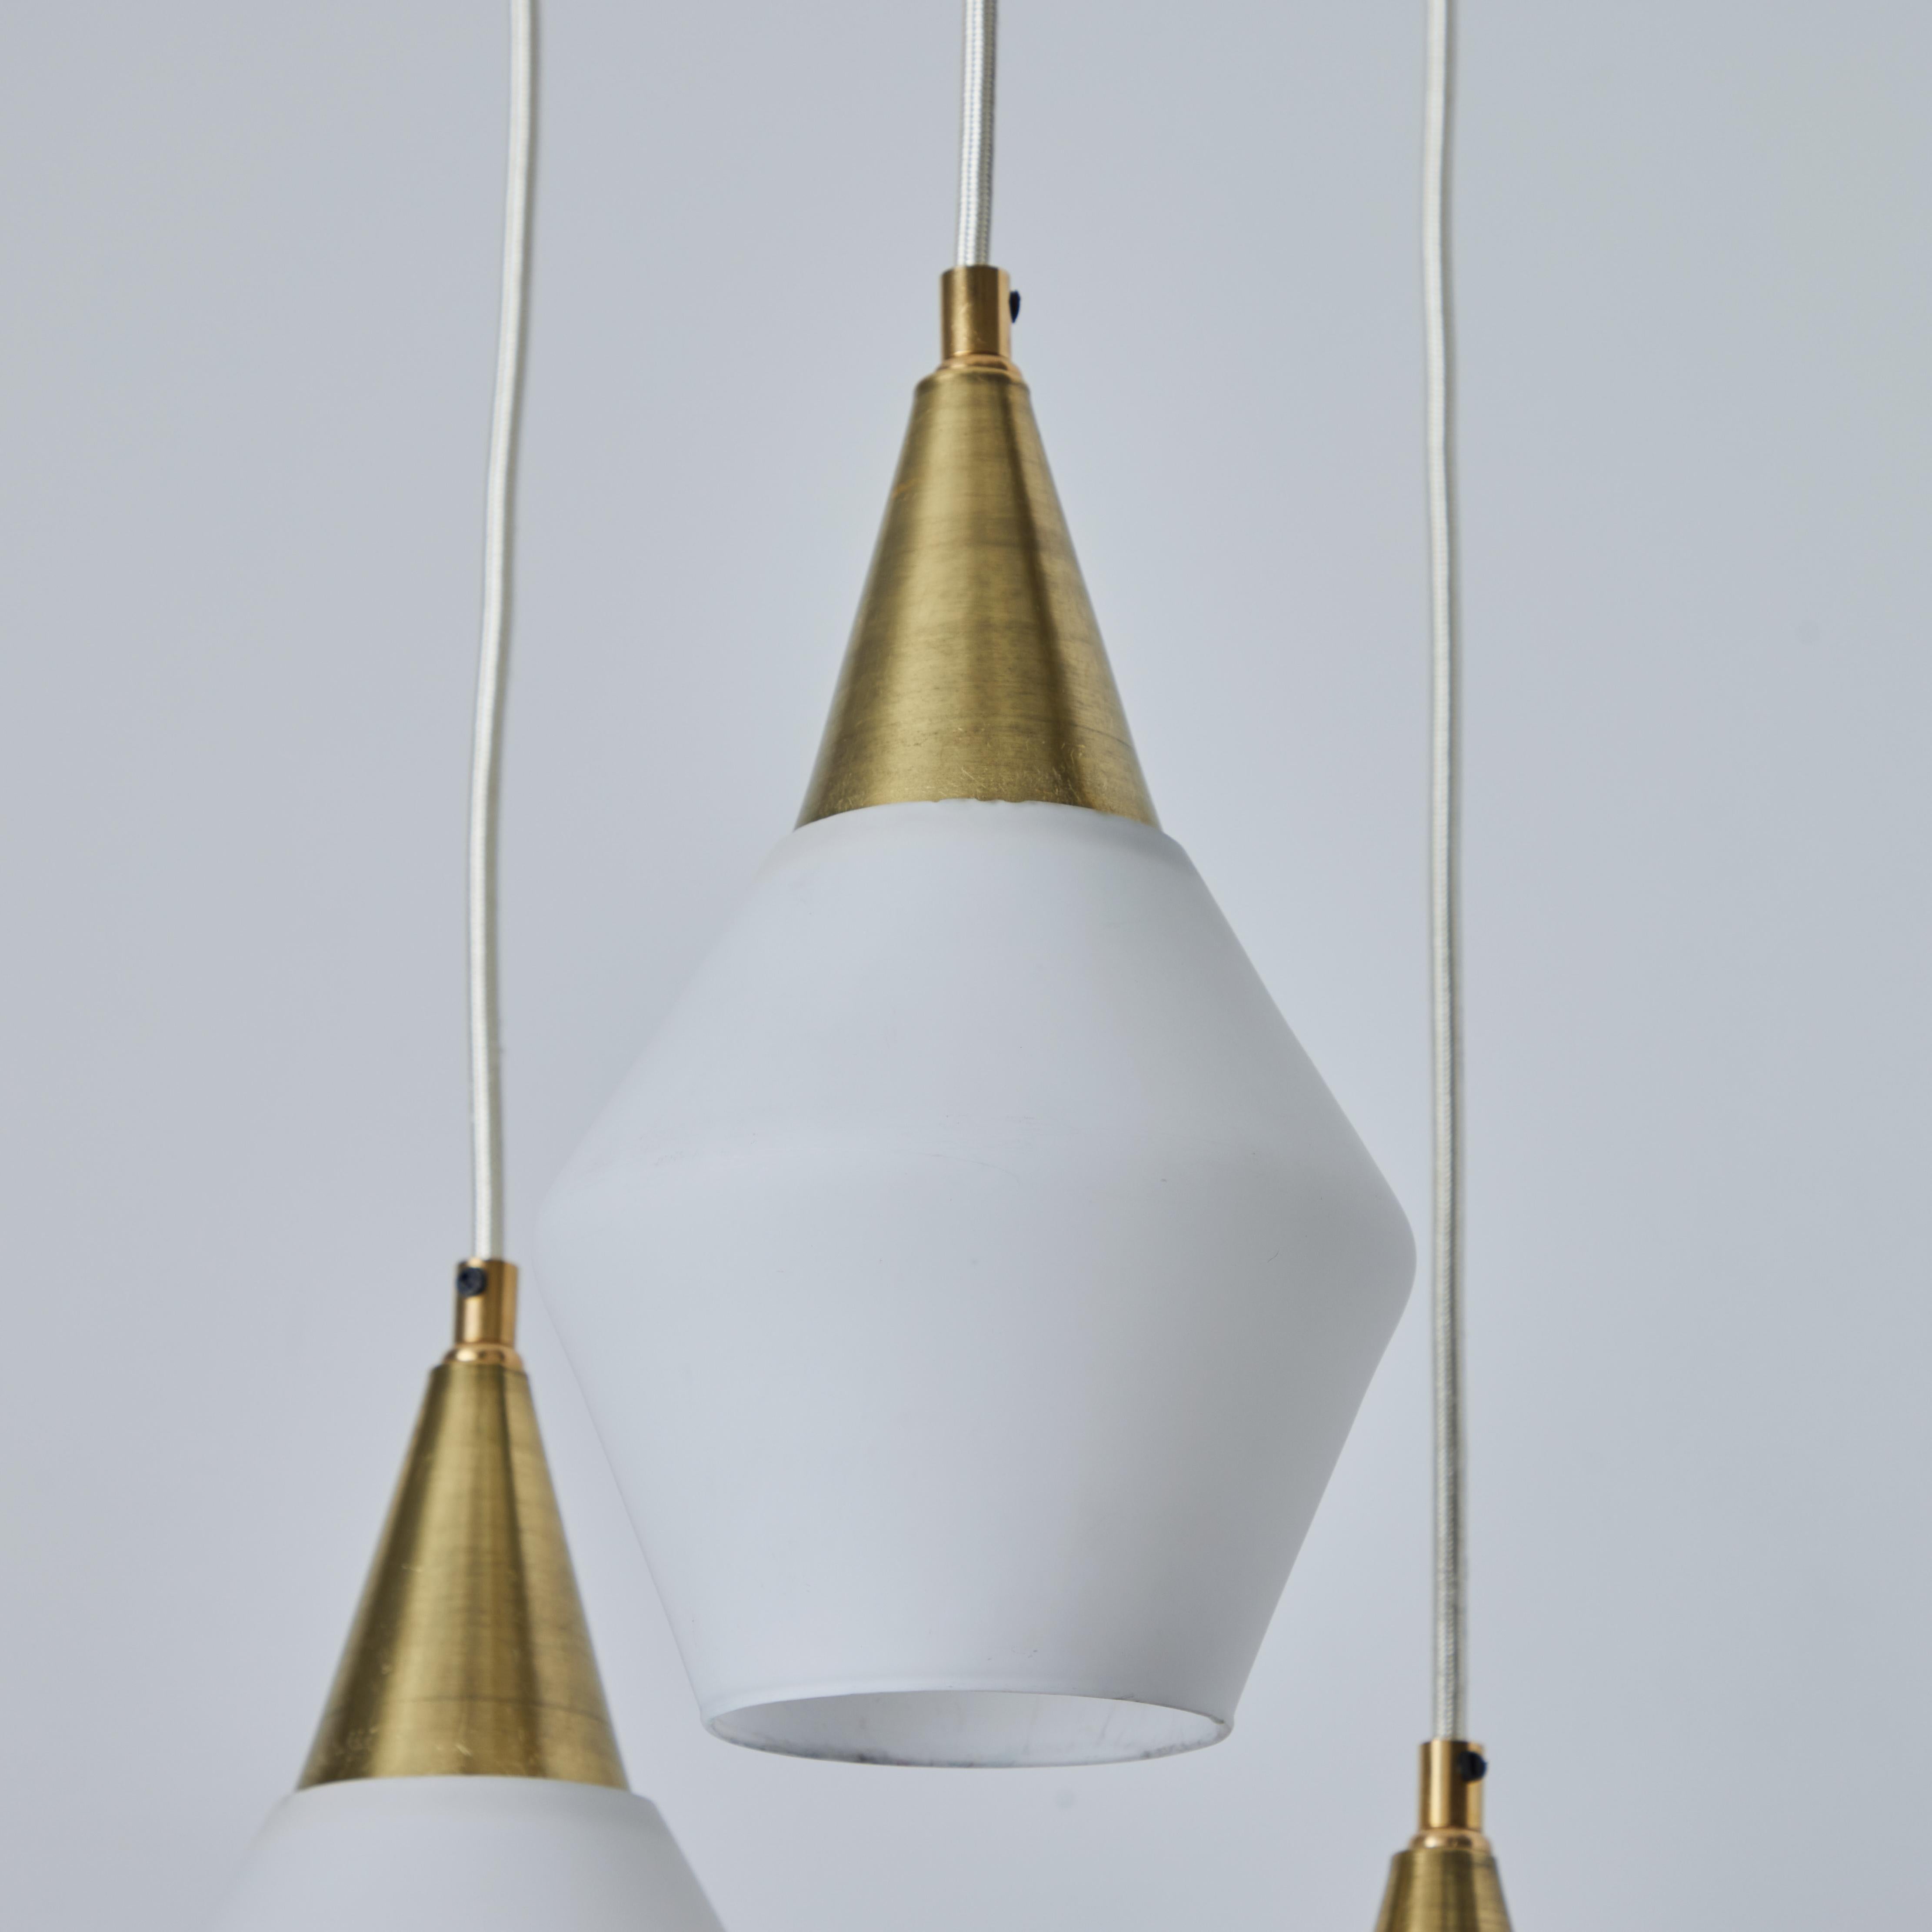 1960s Opaline Glass and Brass Chandelier Attributed to Mauri Almari for Idman For Sale 2